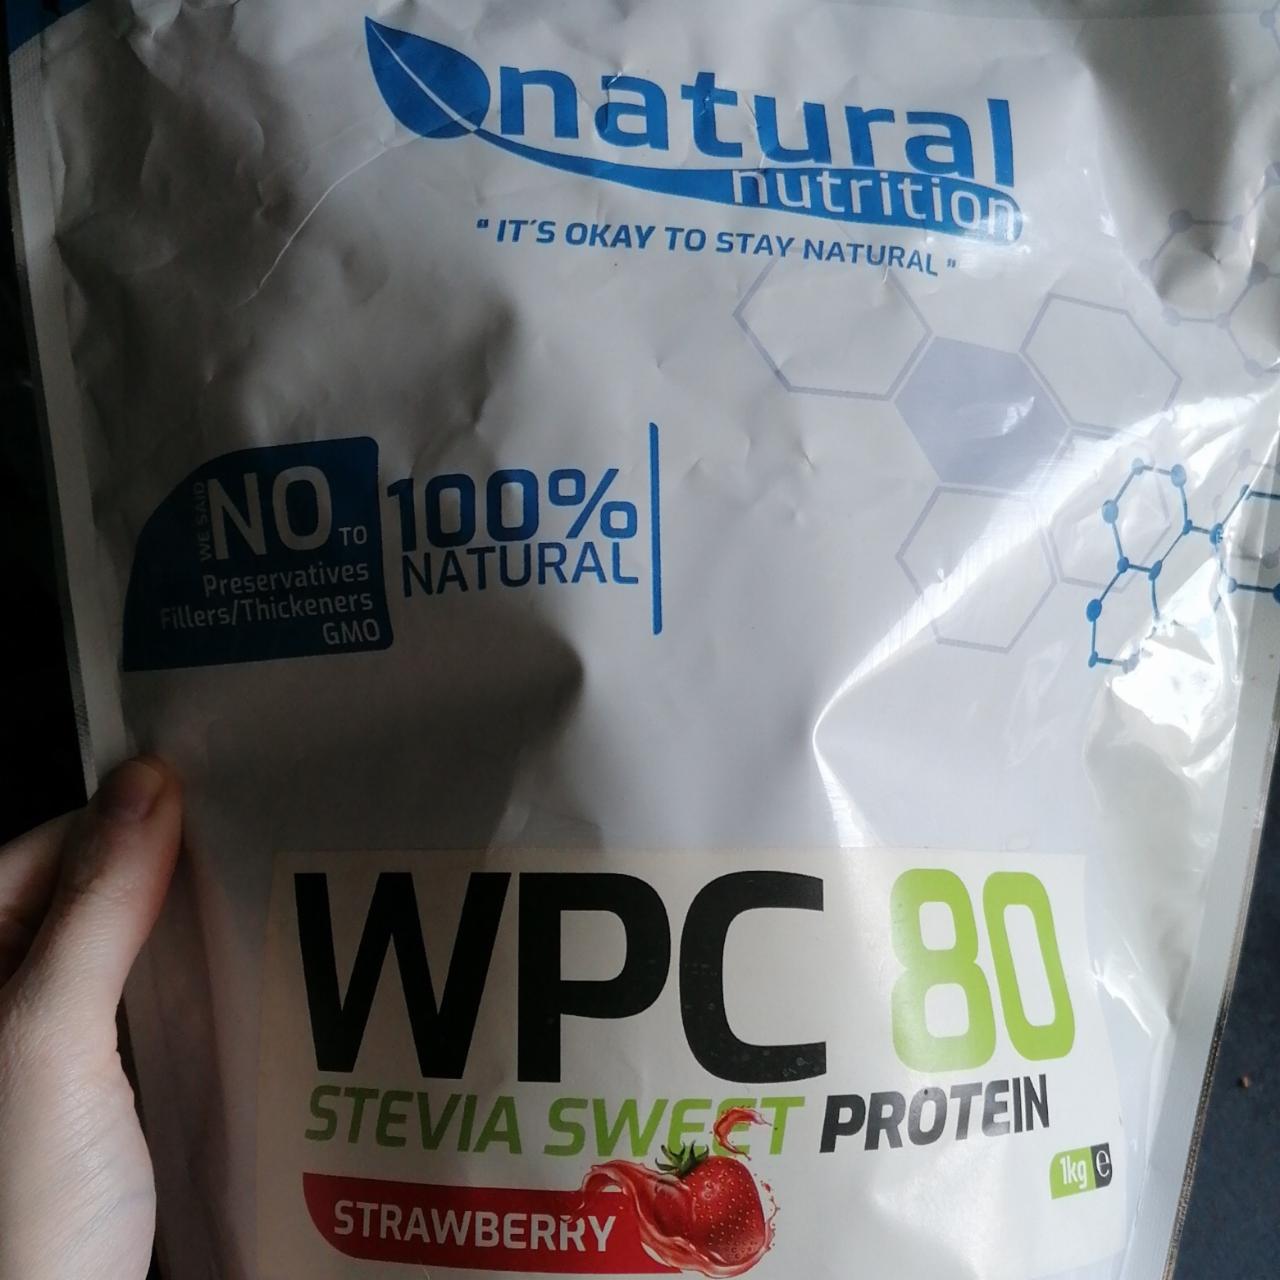 Fotografie - WPC 80 Stevia sweet protein Strawberry Natural Nutrition